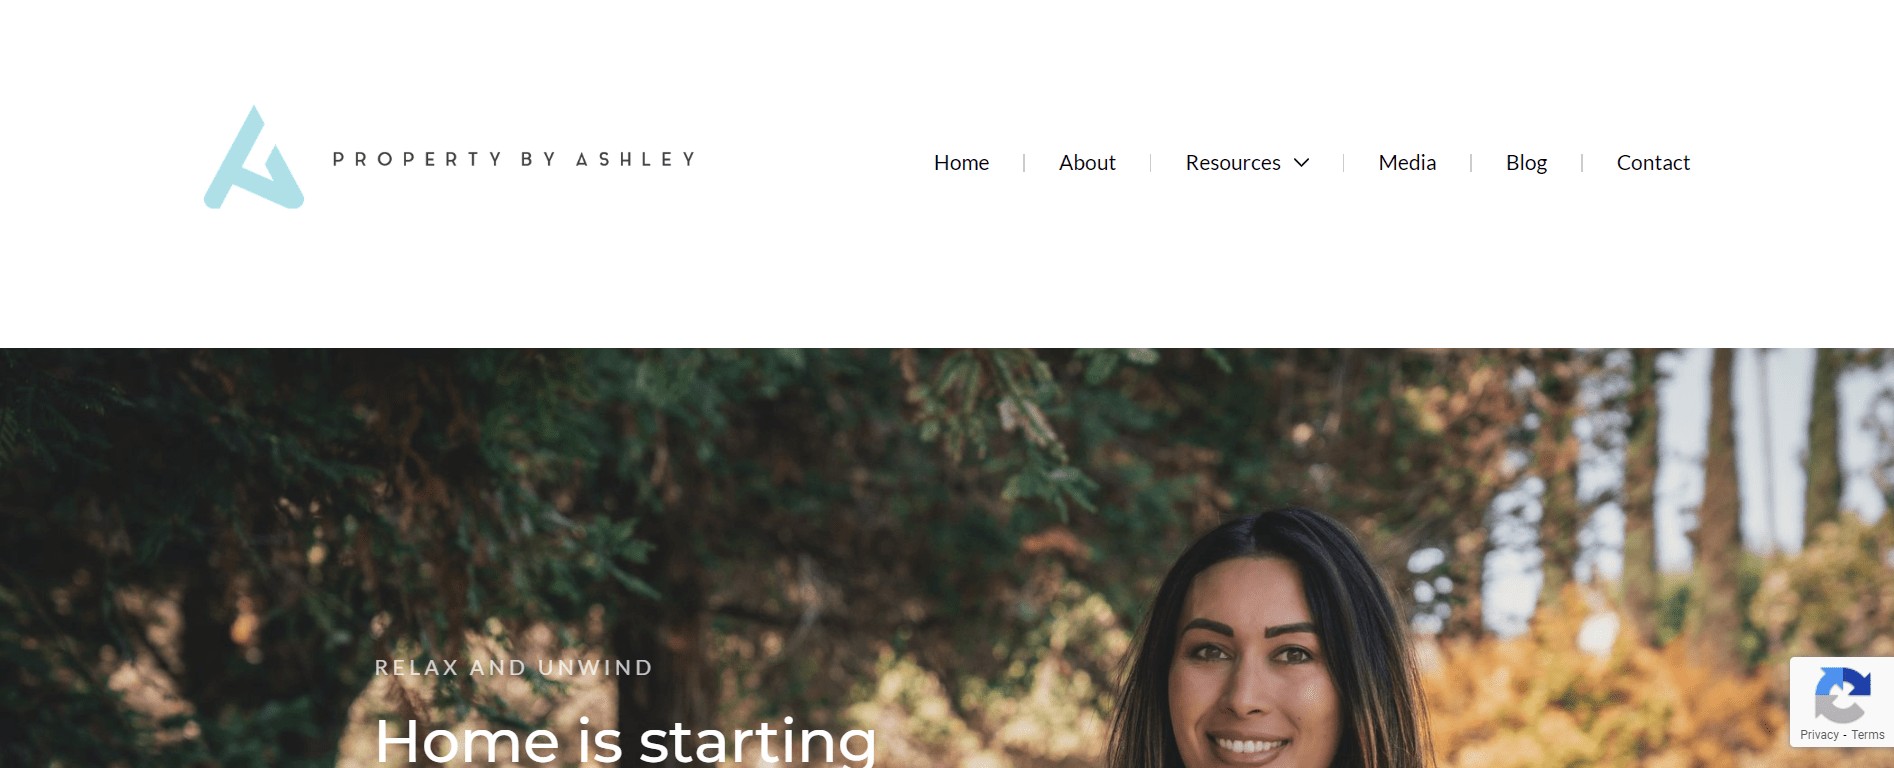 Ashley Lew Real Estate Agent _ Property By Ashley = pagecloud example site